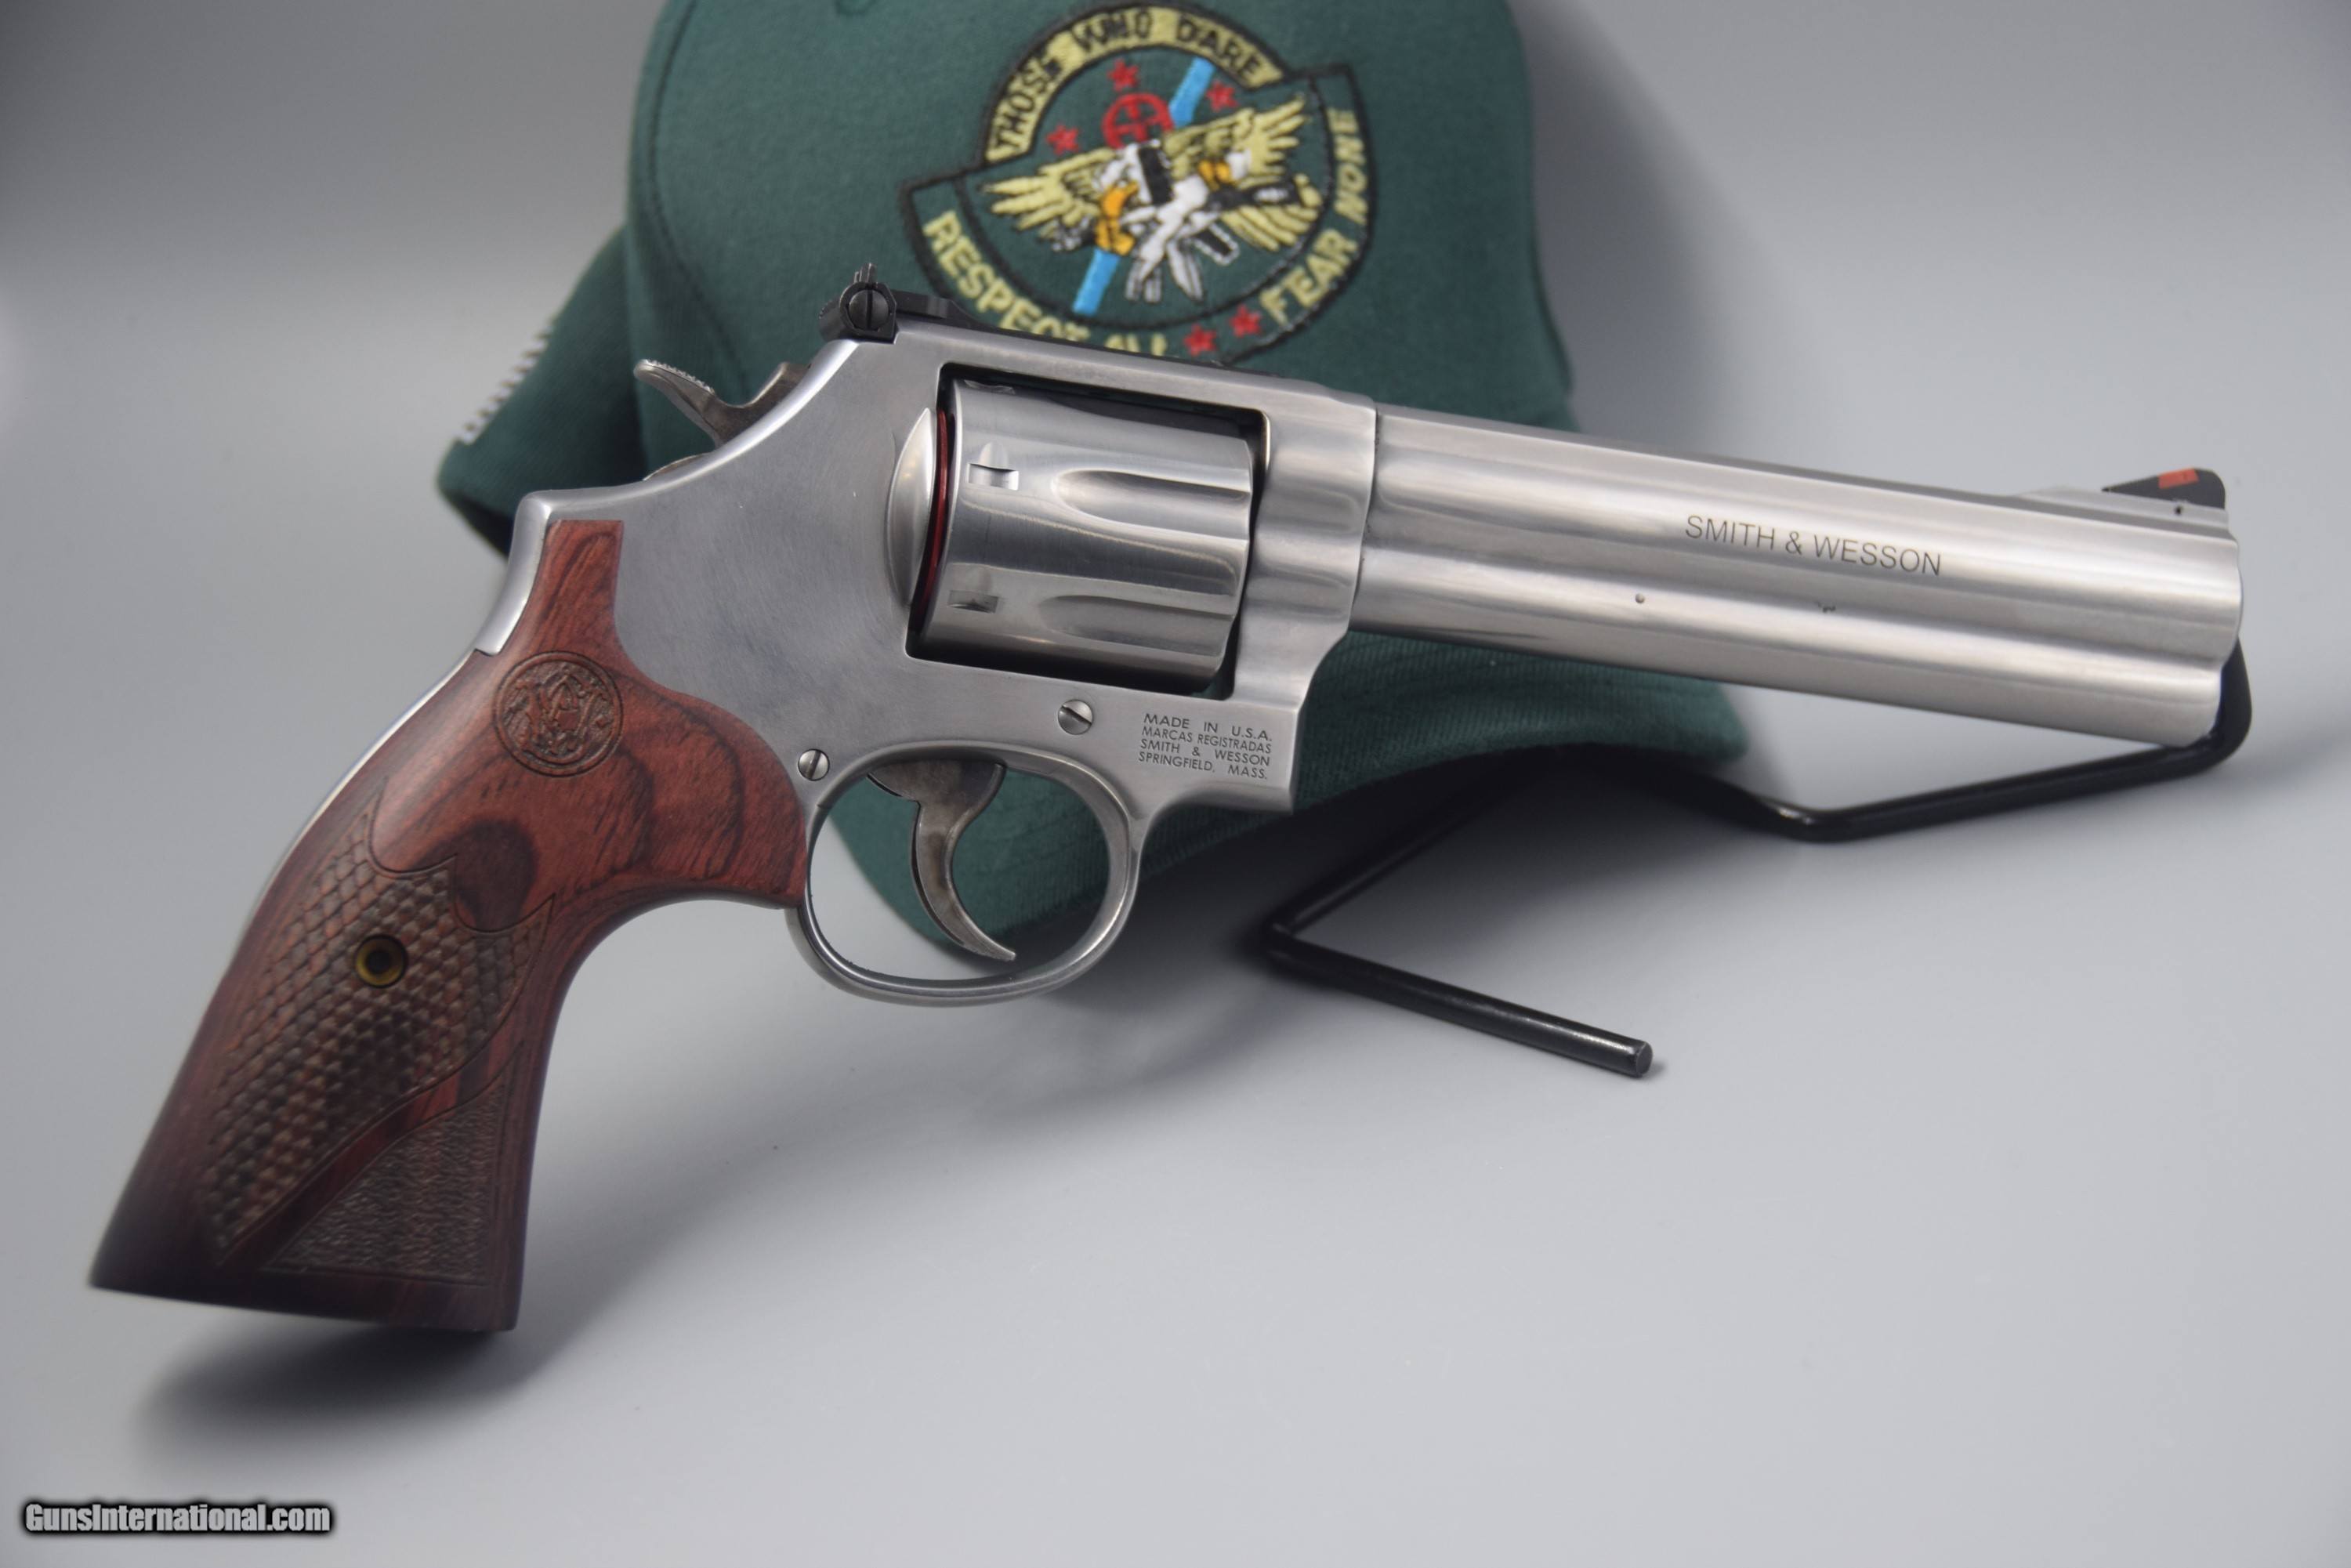 SMITH AND WESSON MODEL 686 DELUX SIX-INCH REVOLVER IN .357 MAGNUM